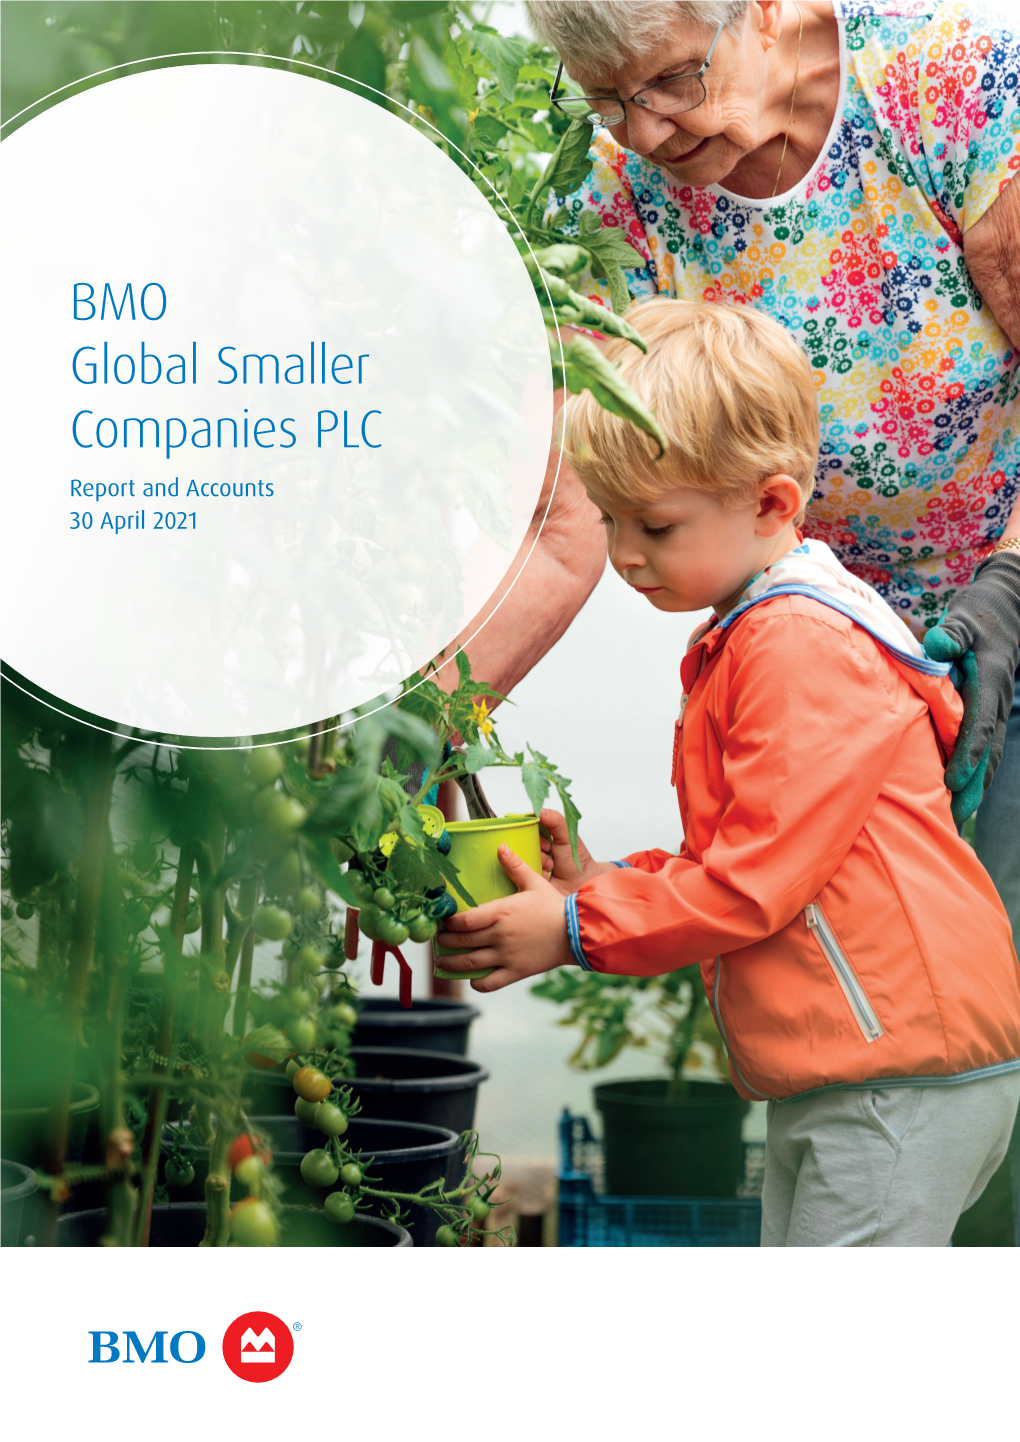 BMO Global Smaller Companies PLC Report and Accounts 30 April 2021